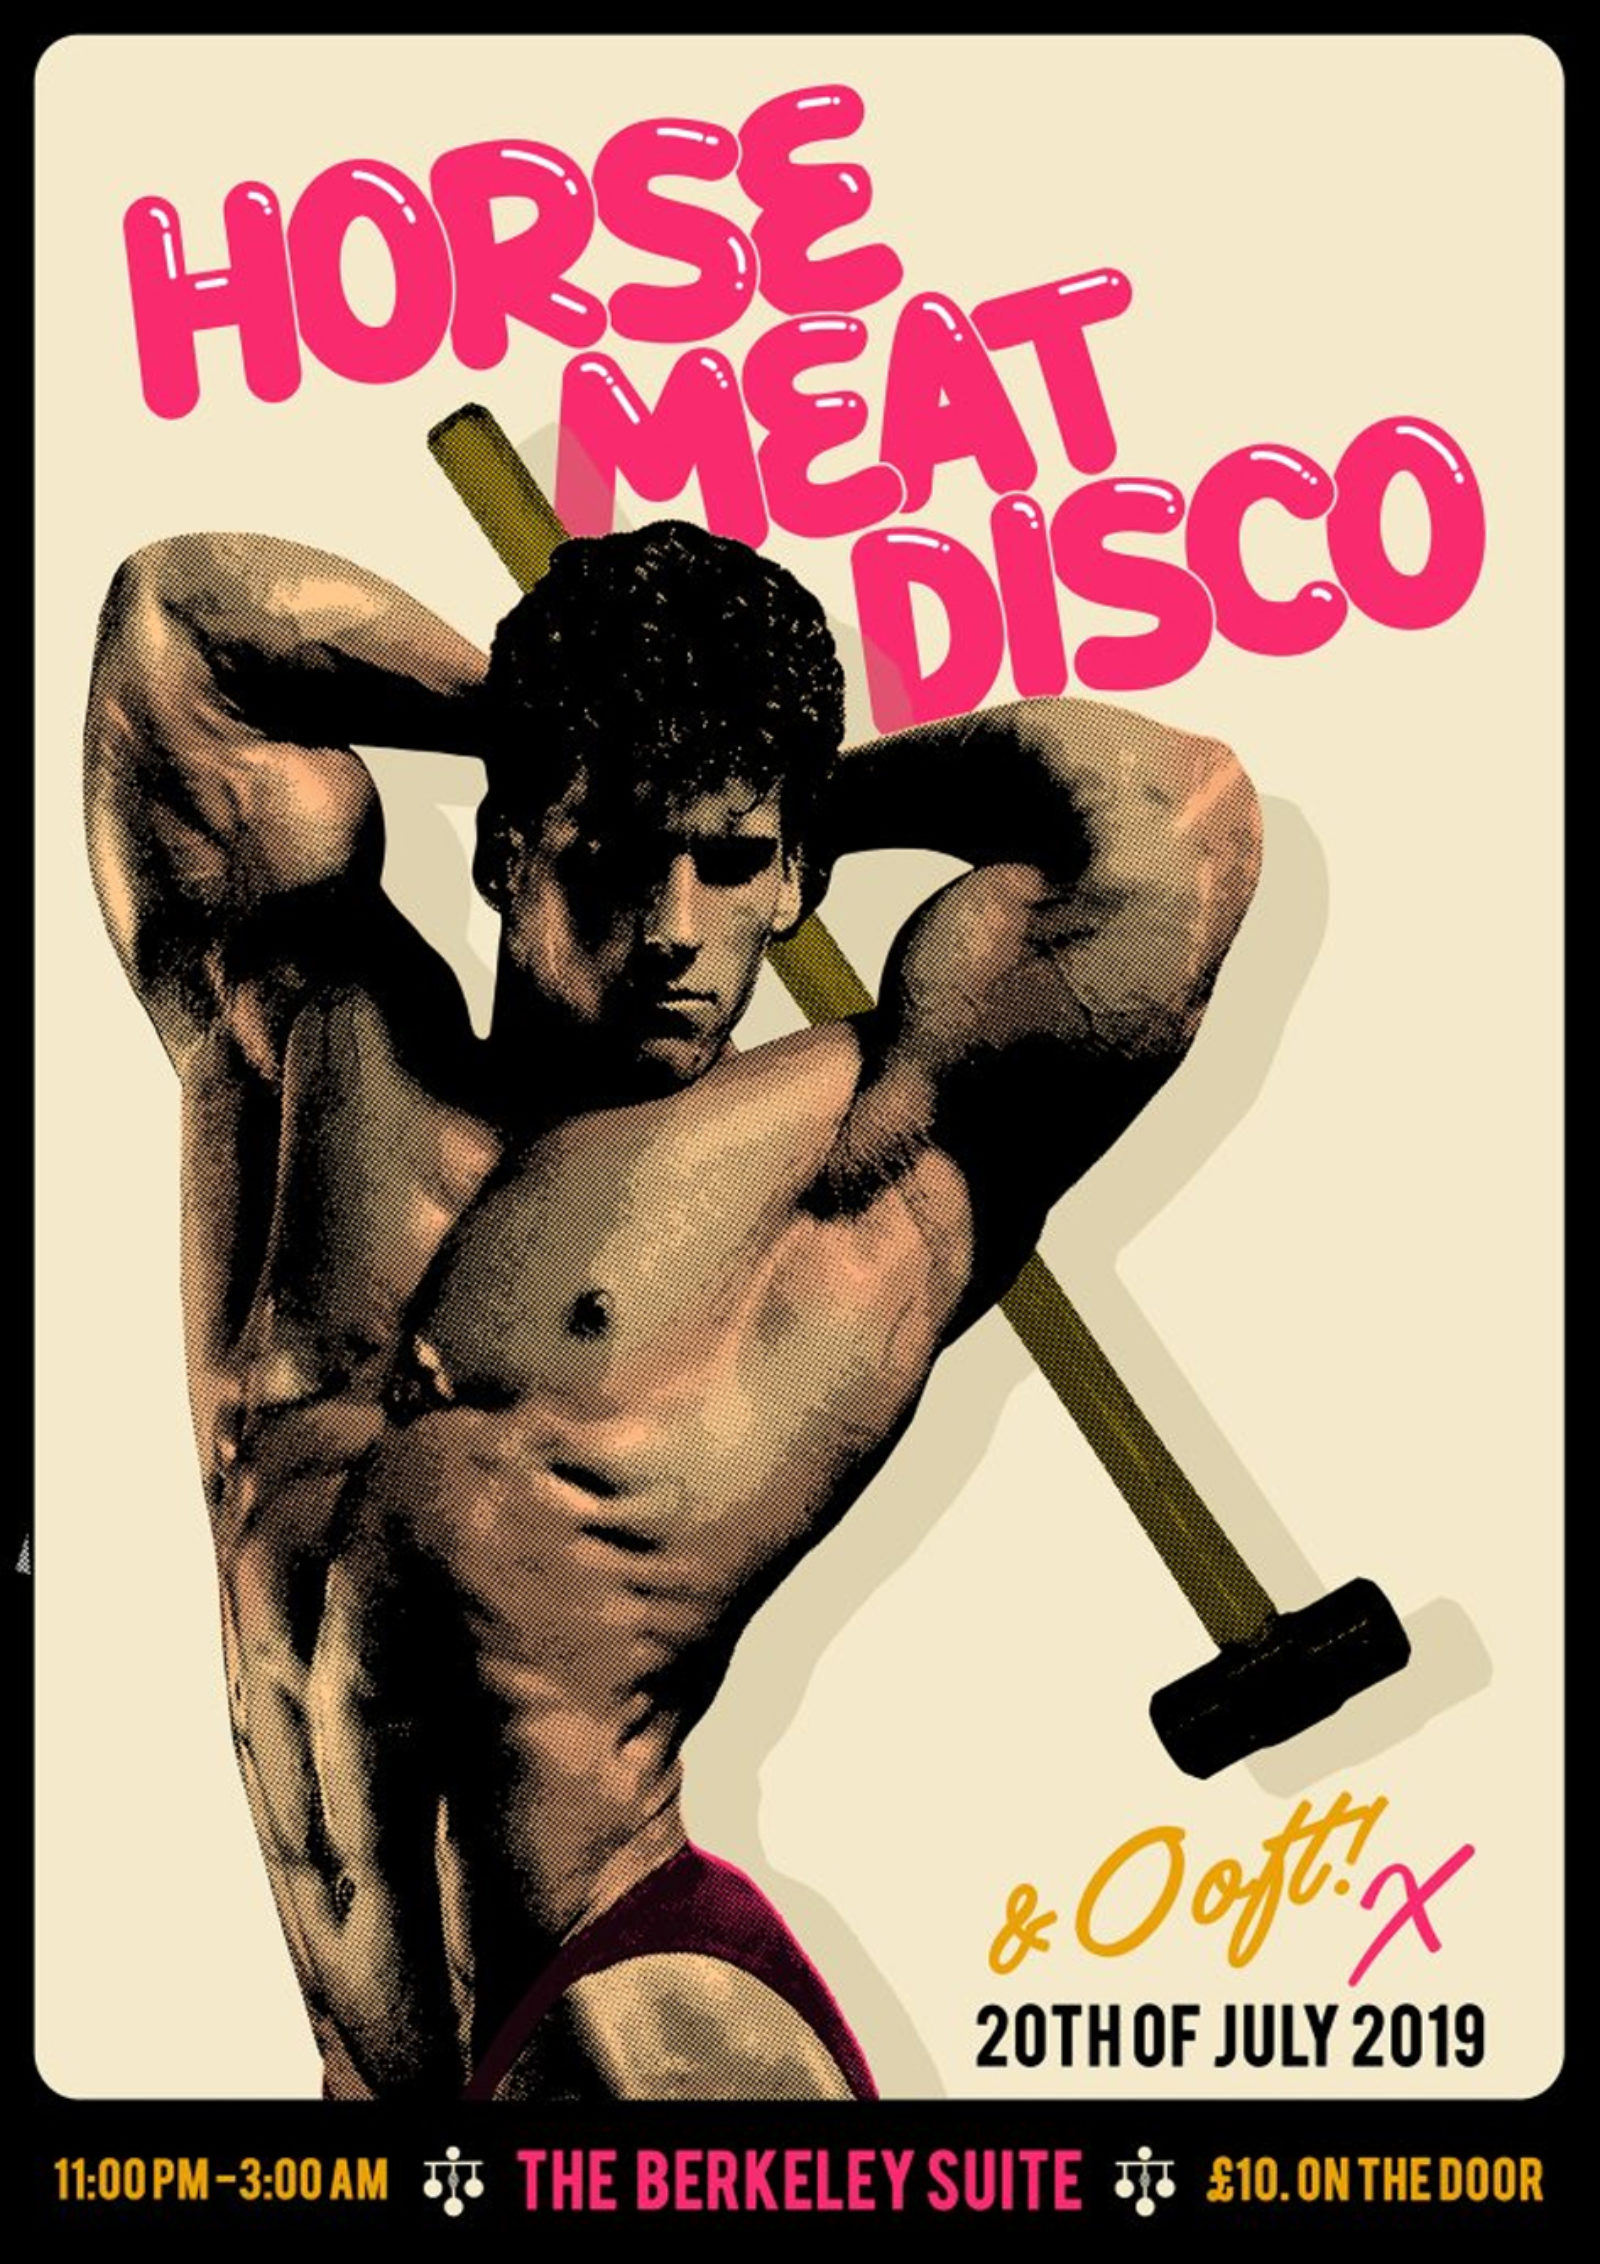 HORSE MEAT DISCO + OOFT!